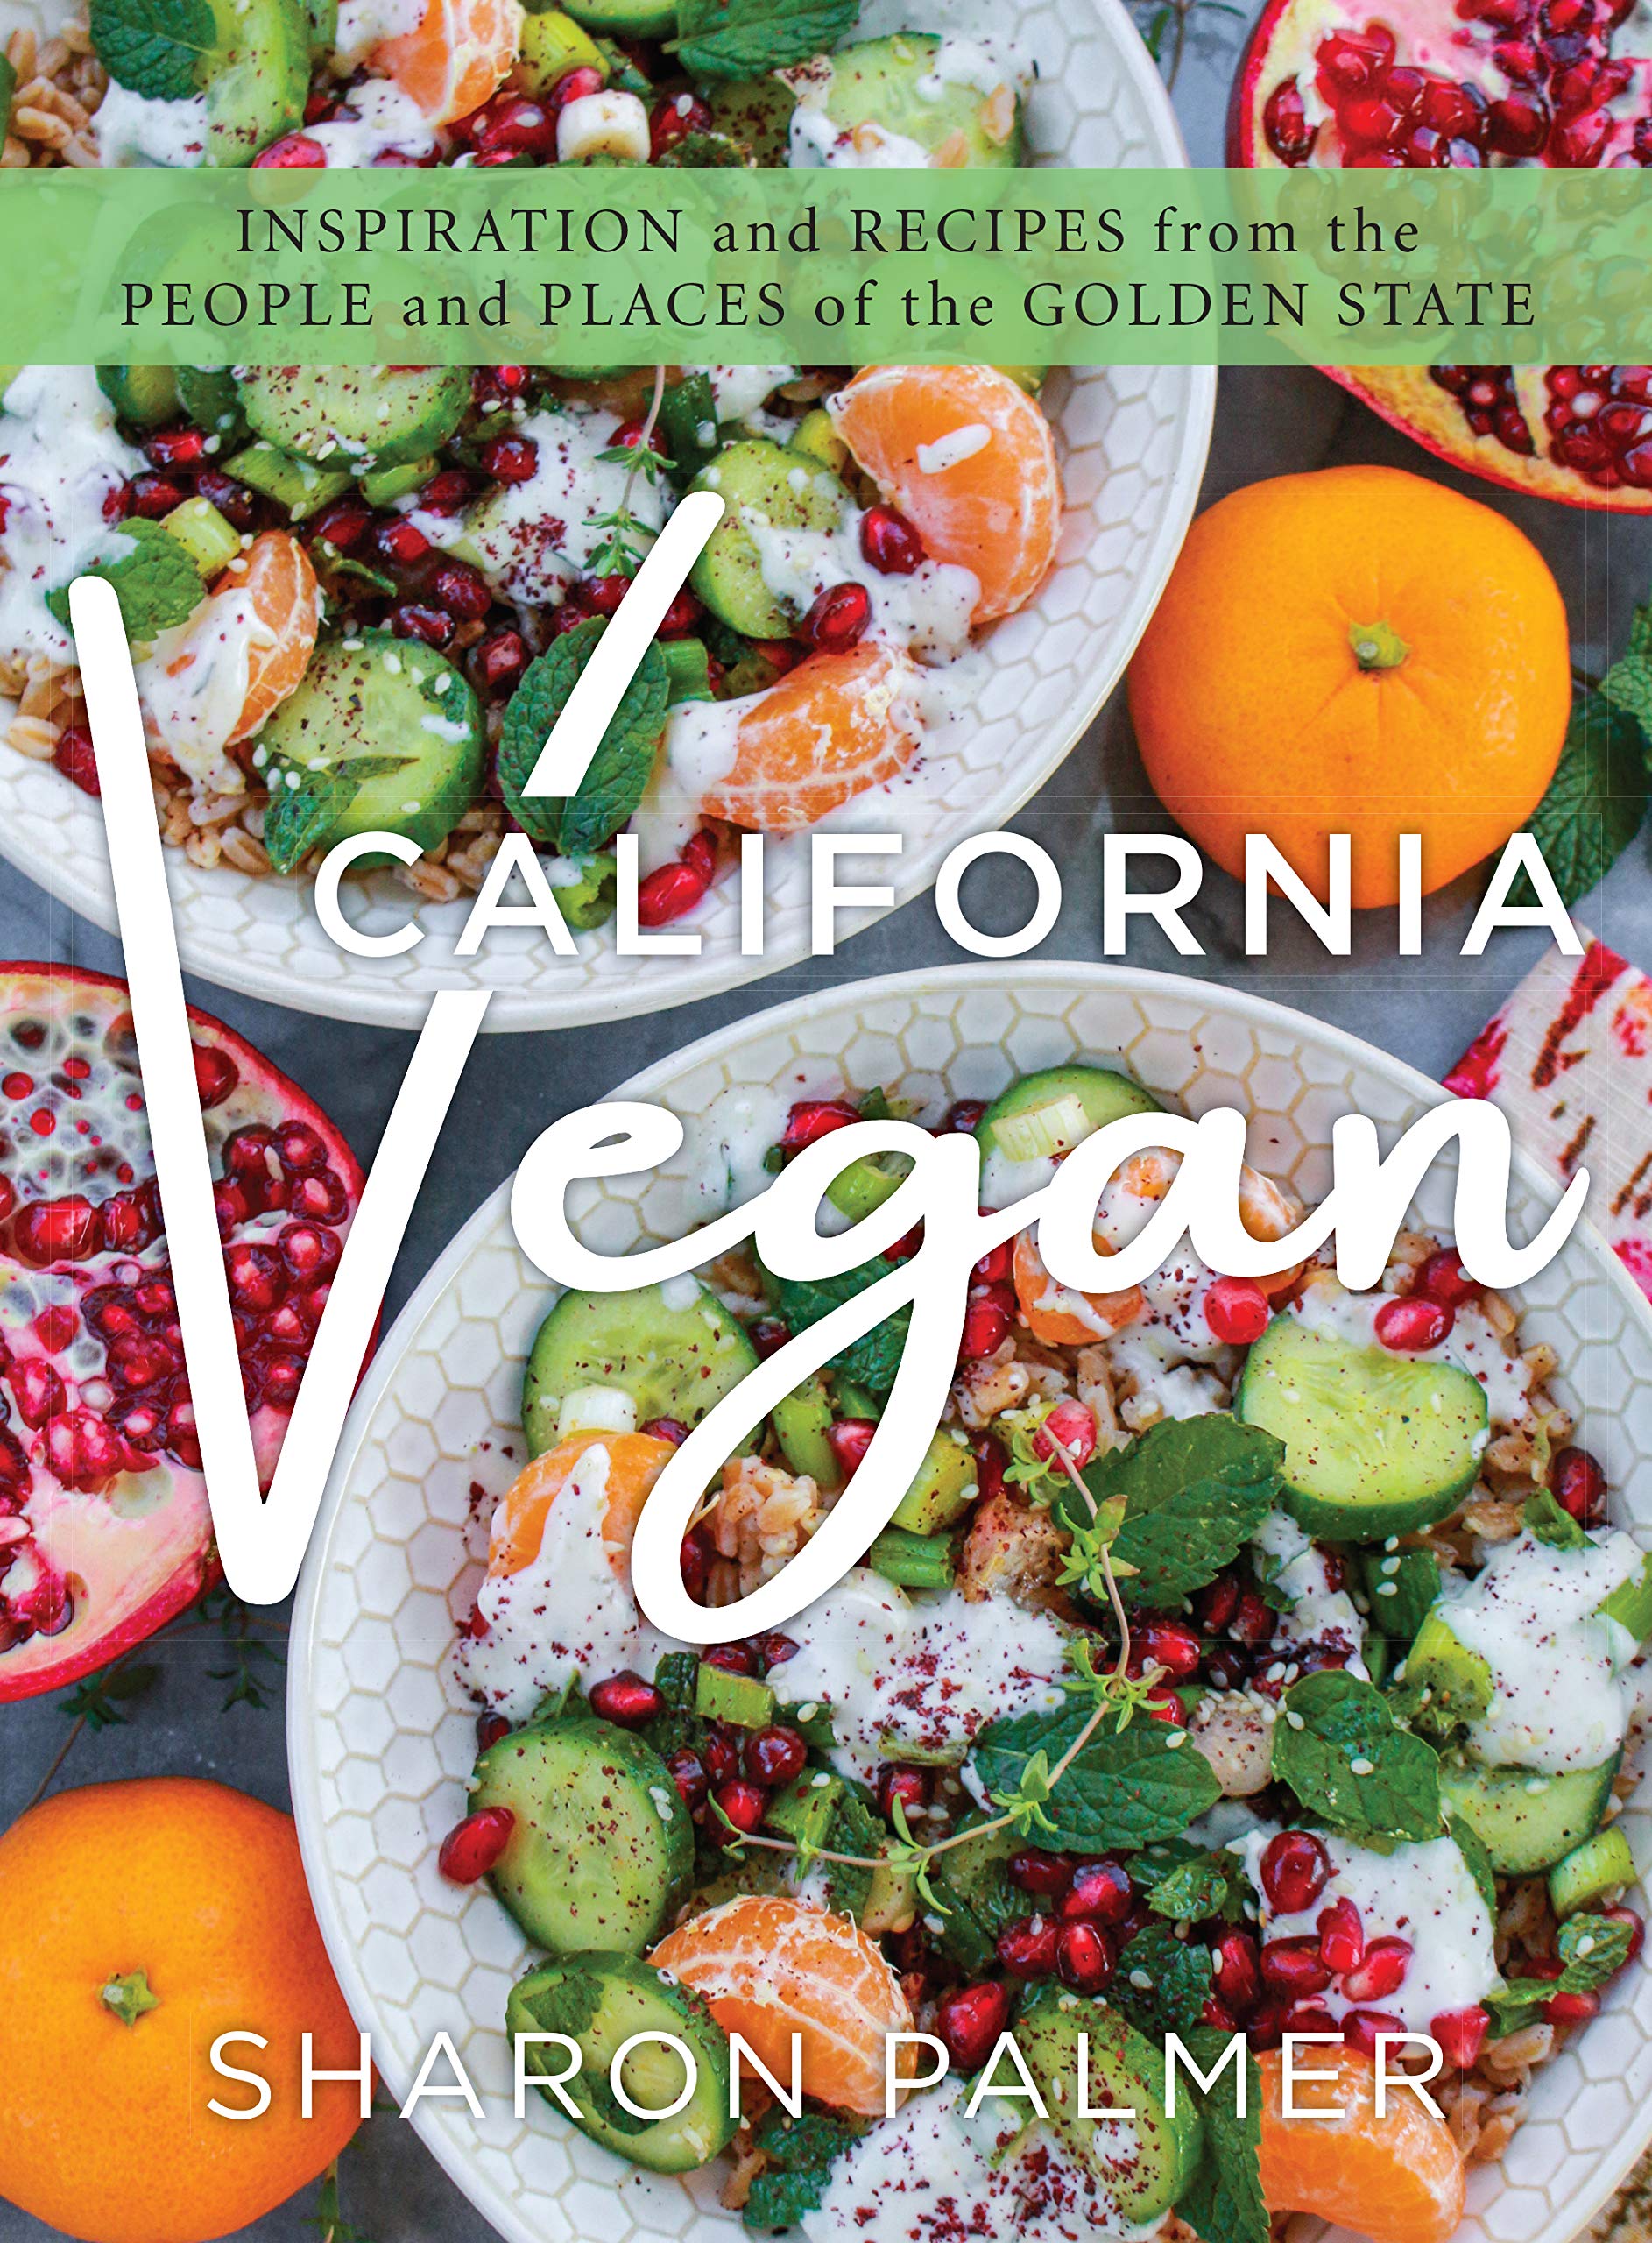 California Vegan: Inspiration and Recipes from the People and Places of the Golden State (Sharon Palmer)